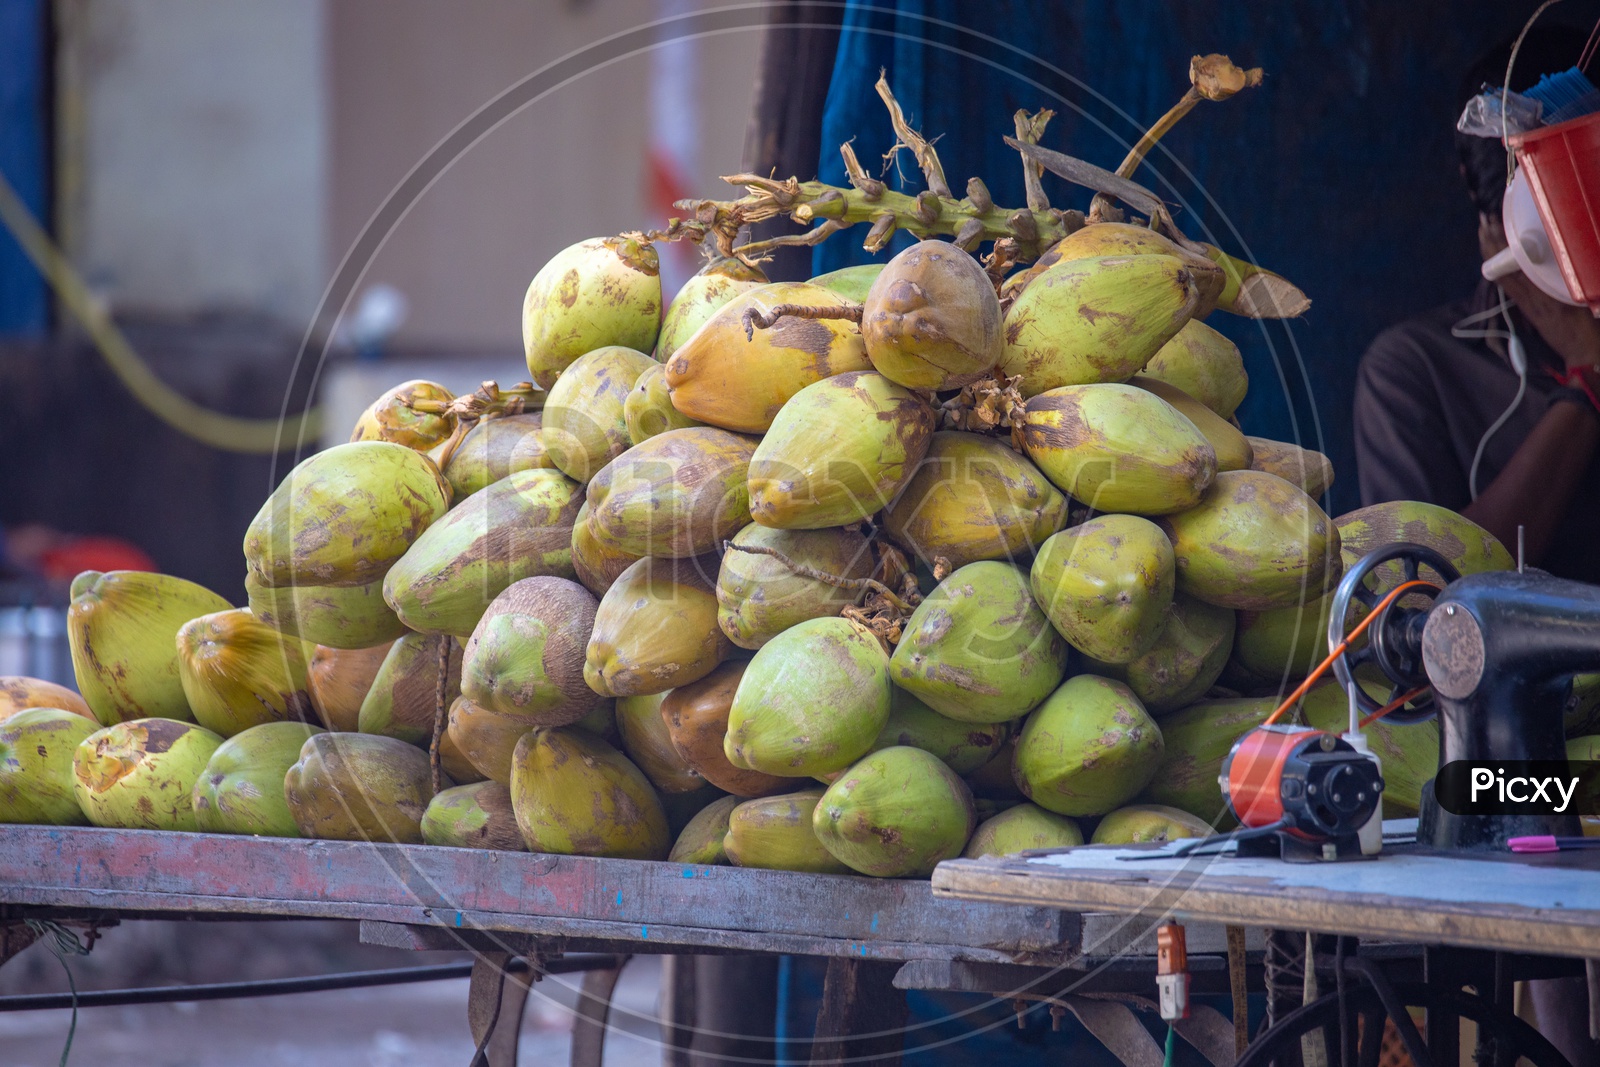 Coconuts Selling at a Vendor Stall